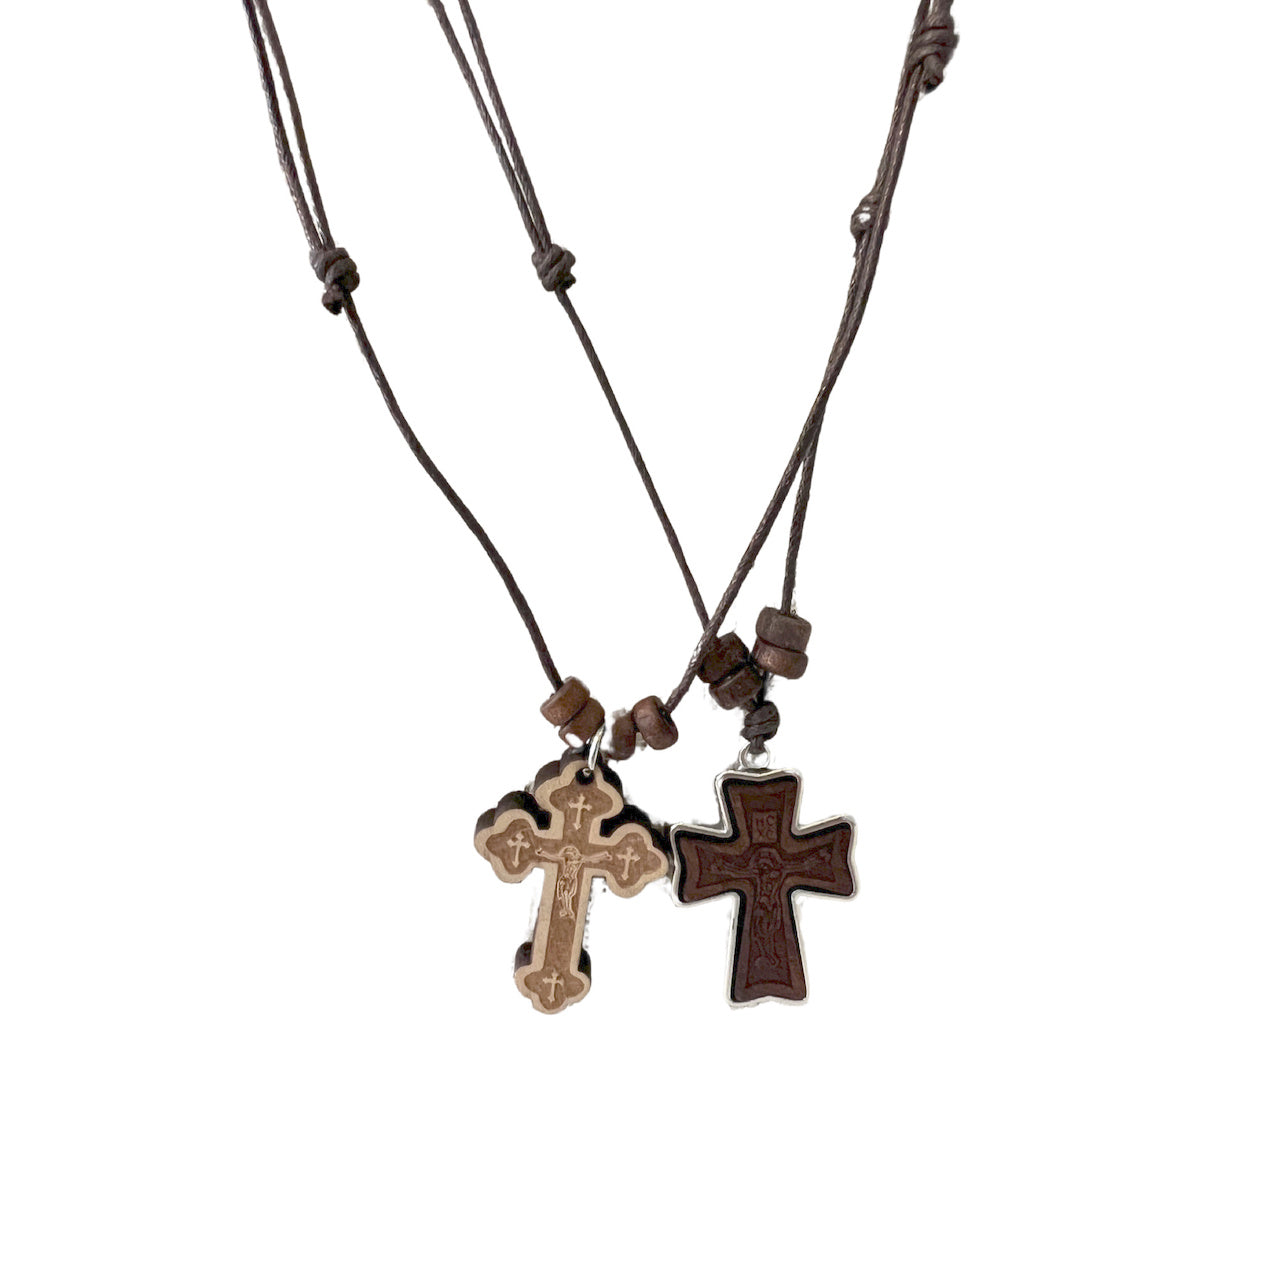 70cm Rope Cord Jesus Cross Necklace Crucifix Wood Pendant Necklaces For Men  Woman Black Sweater Chain Religious Unisex Jewelry - Necklace - AliExpress